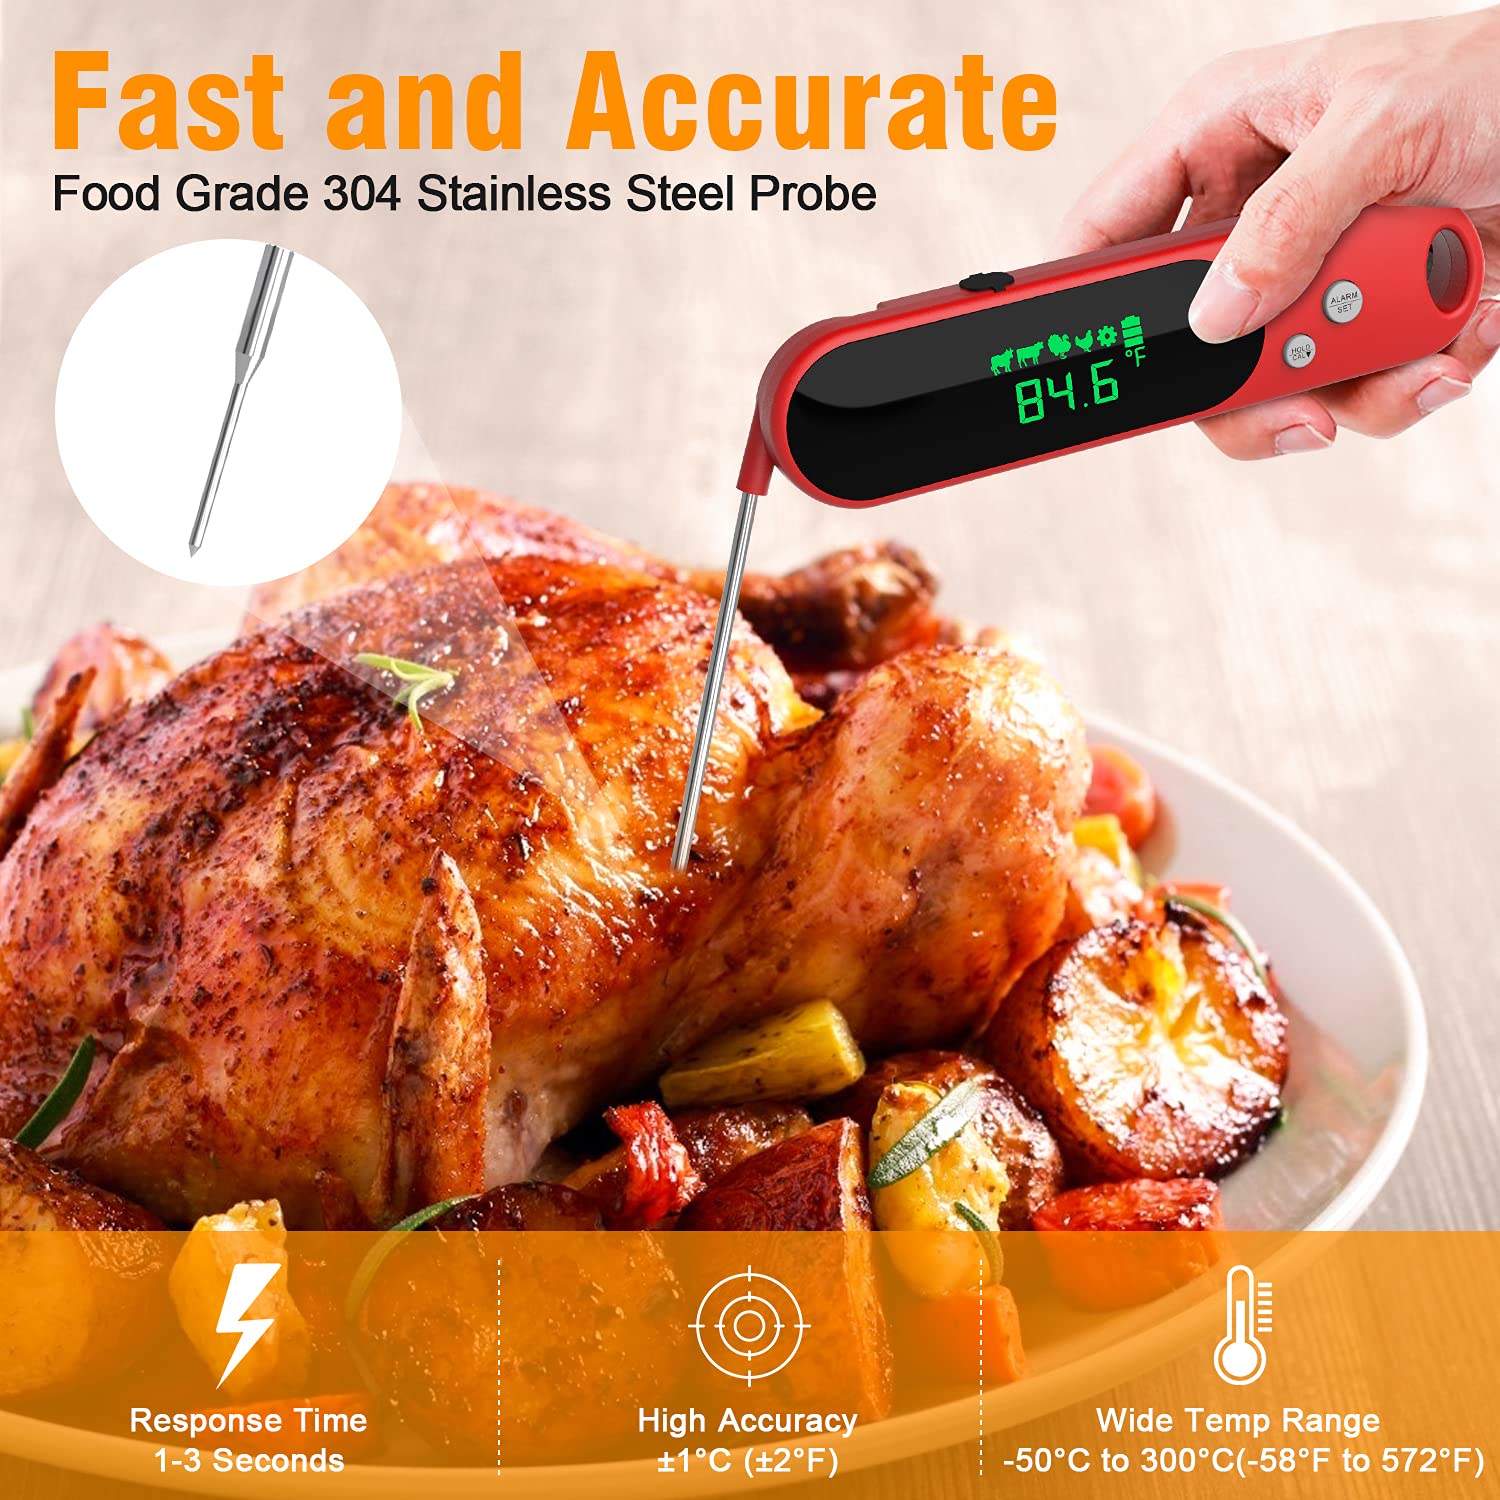 Dual Probe Digital Instant Read Food Thermometer with Alarm and Calibration Function, Waterproof Cooking Thermometer for Grilling, Baking, BBQ, Candy, Milk